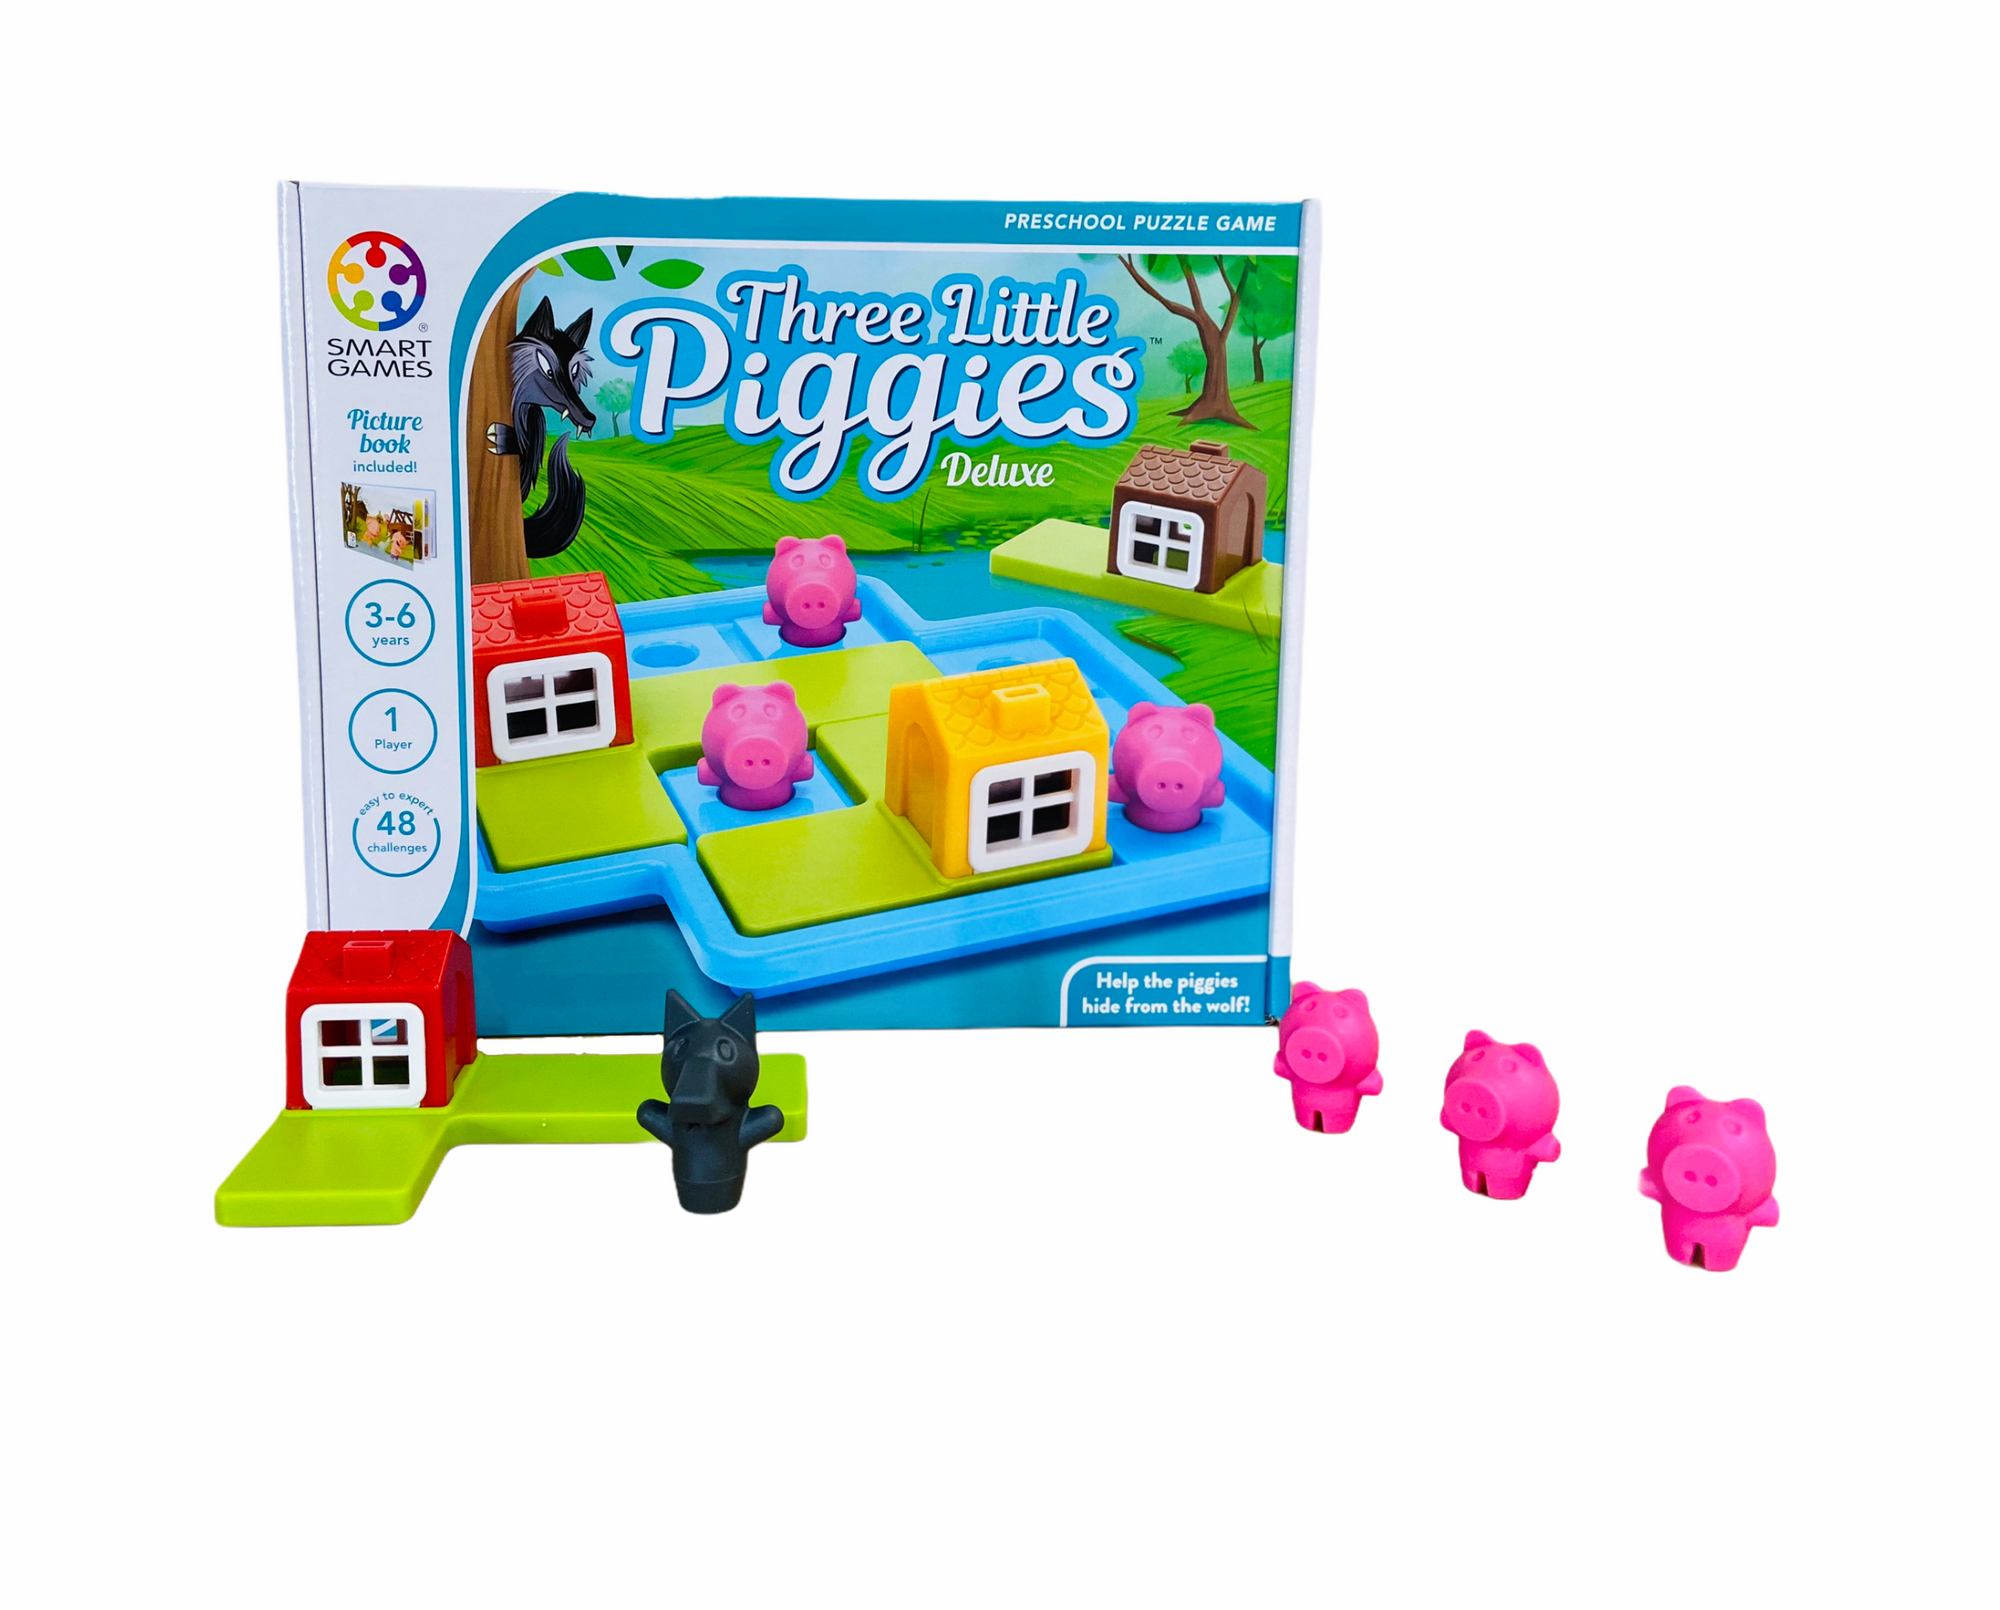 Smart Games Three Little Piggies on display with pieces in front